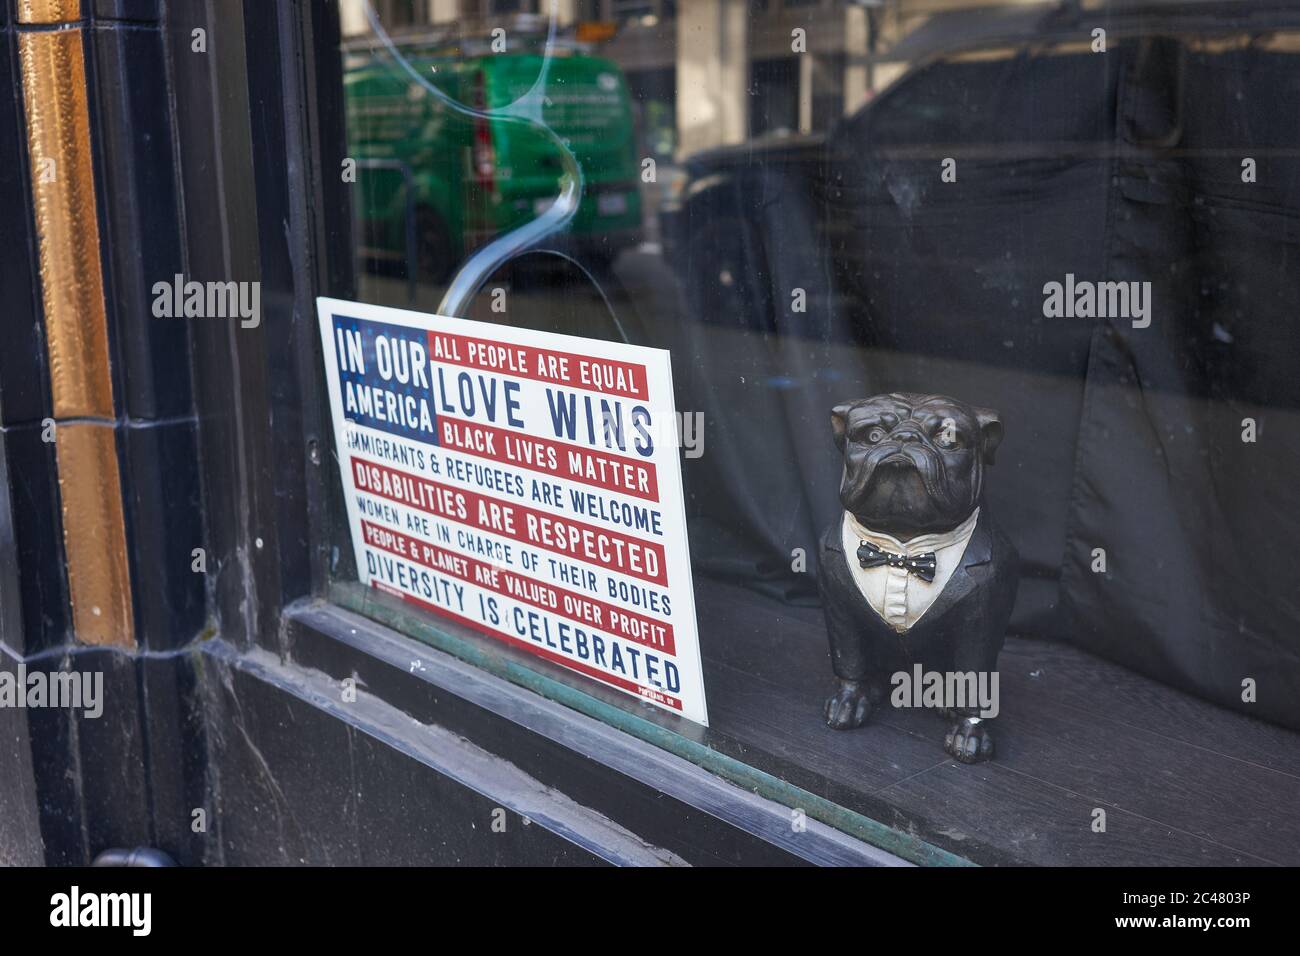 Pro-democracy and Black Lives Matter movement signage is seen in a closed retail store in downtown Portland, Oregon, on Tuesday, Jun 23, 2020. Stock Photo